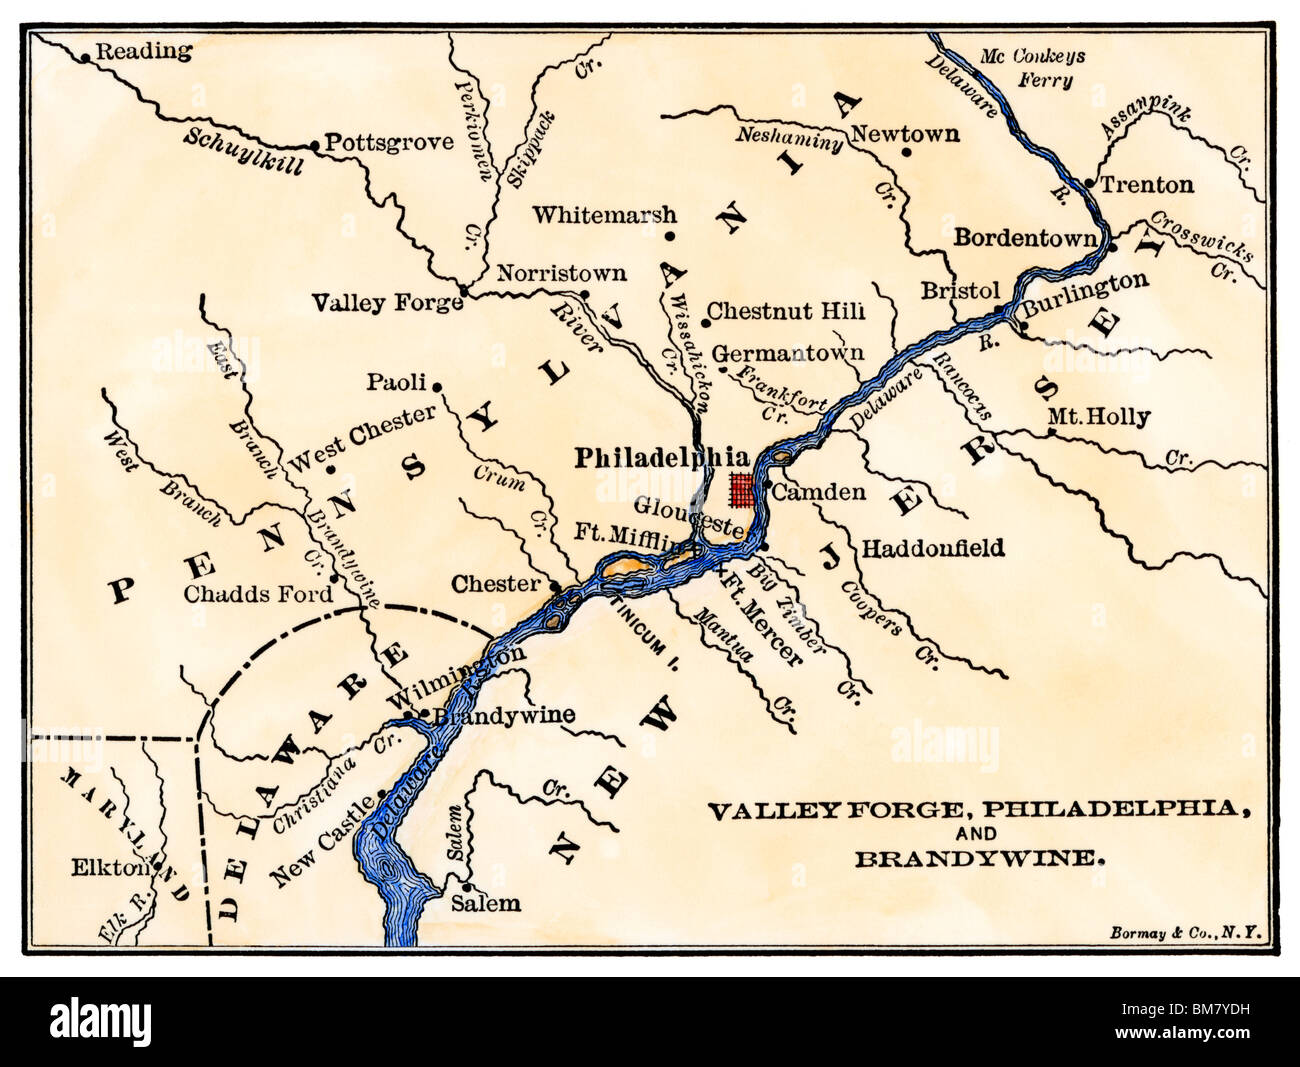 Map of the Philadelphia area, Valley Forge, and the Brandywine. Hand-colored woodcut Stock Photo